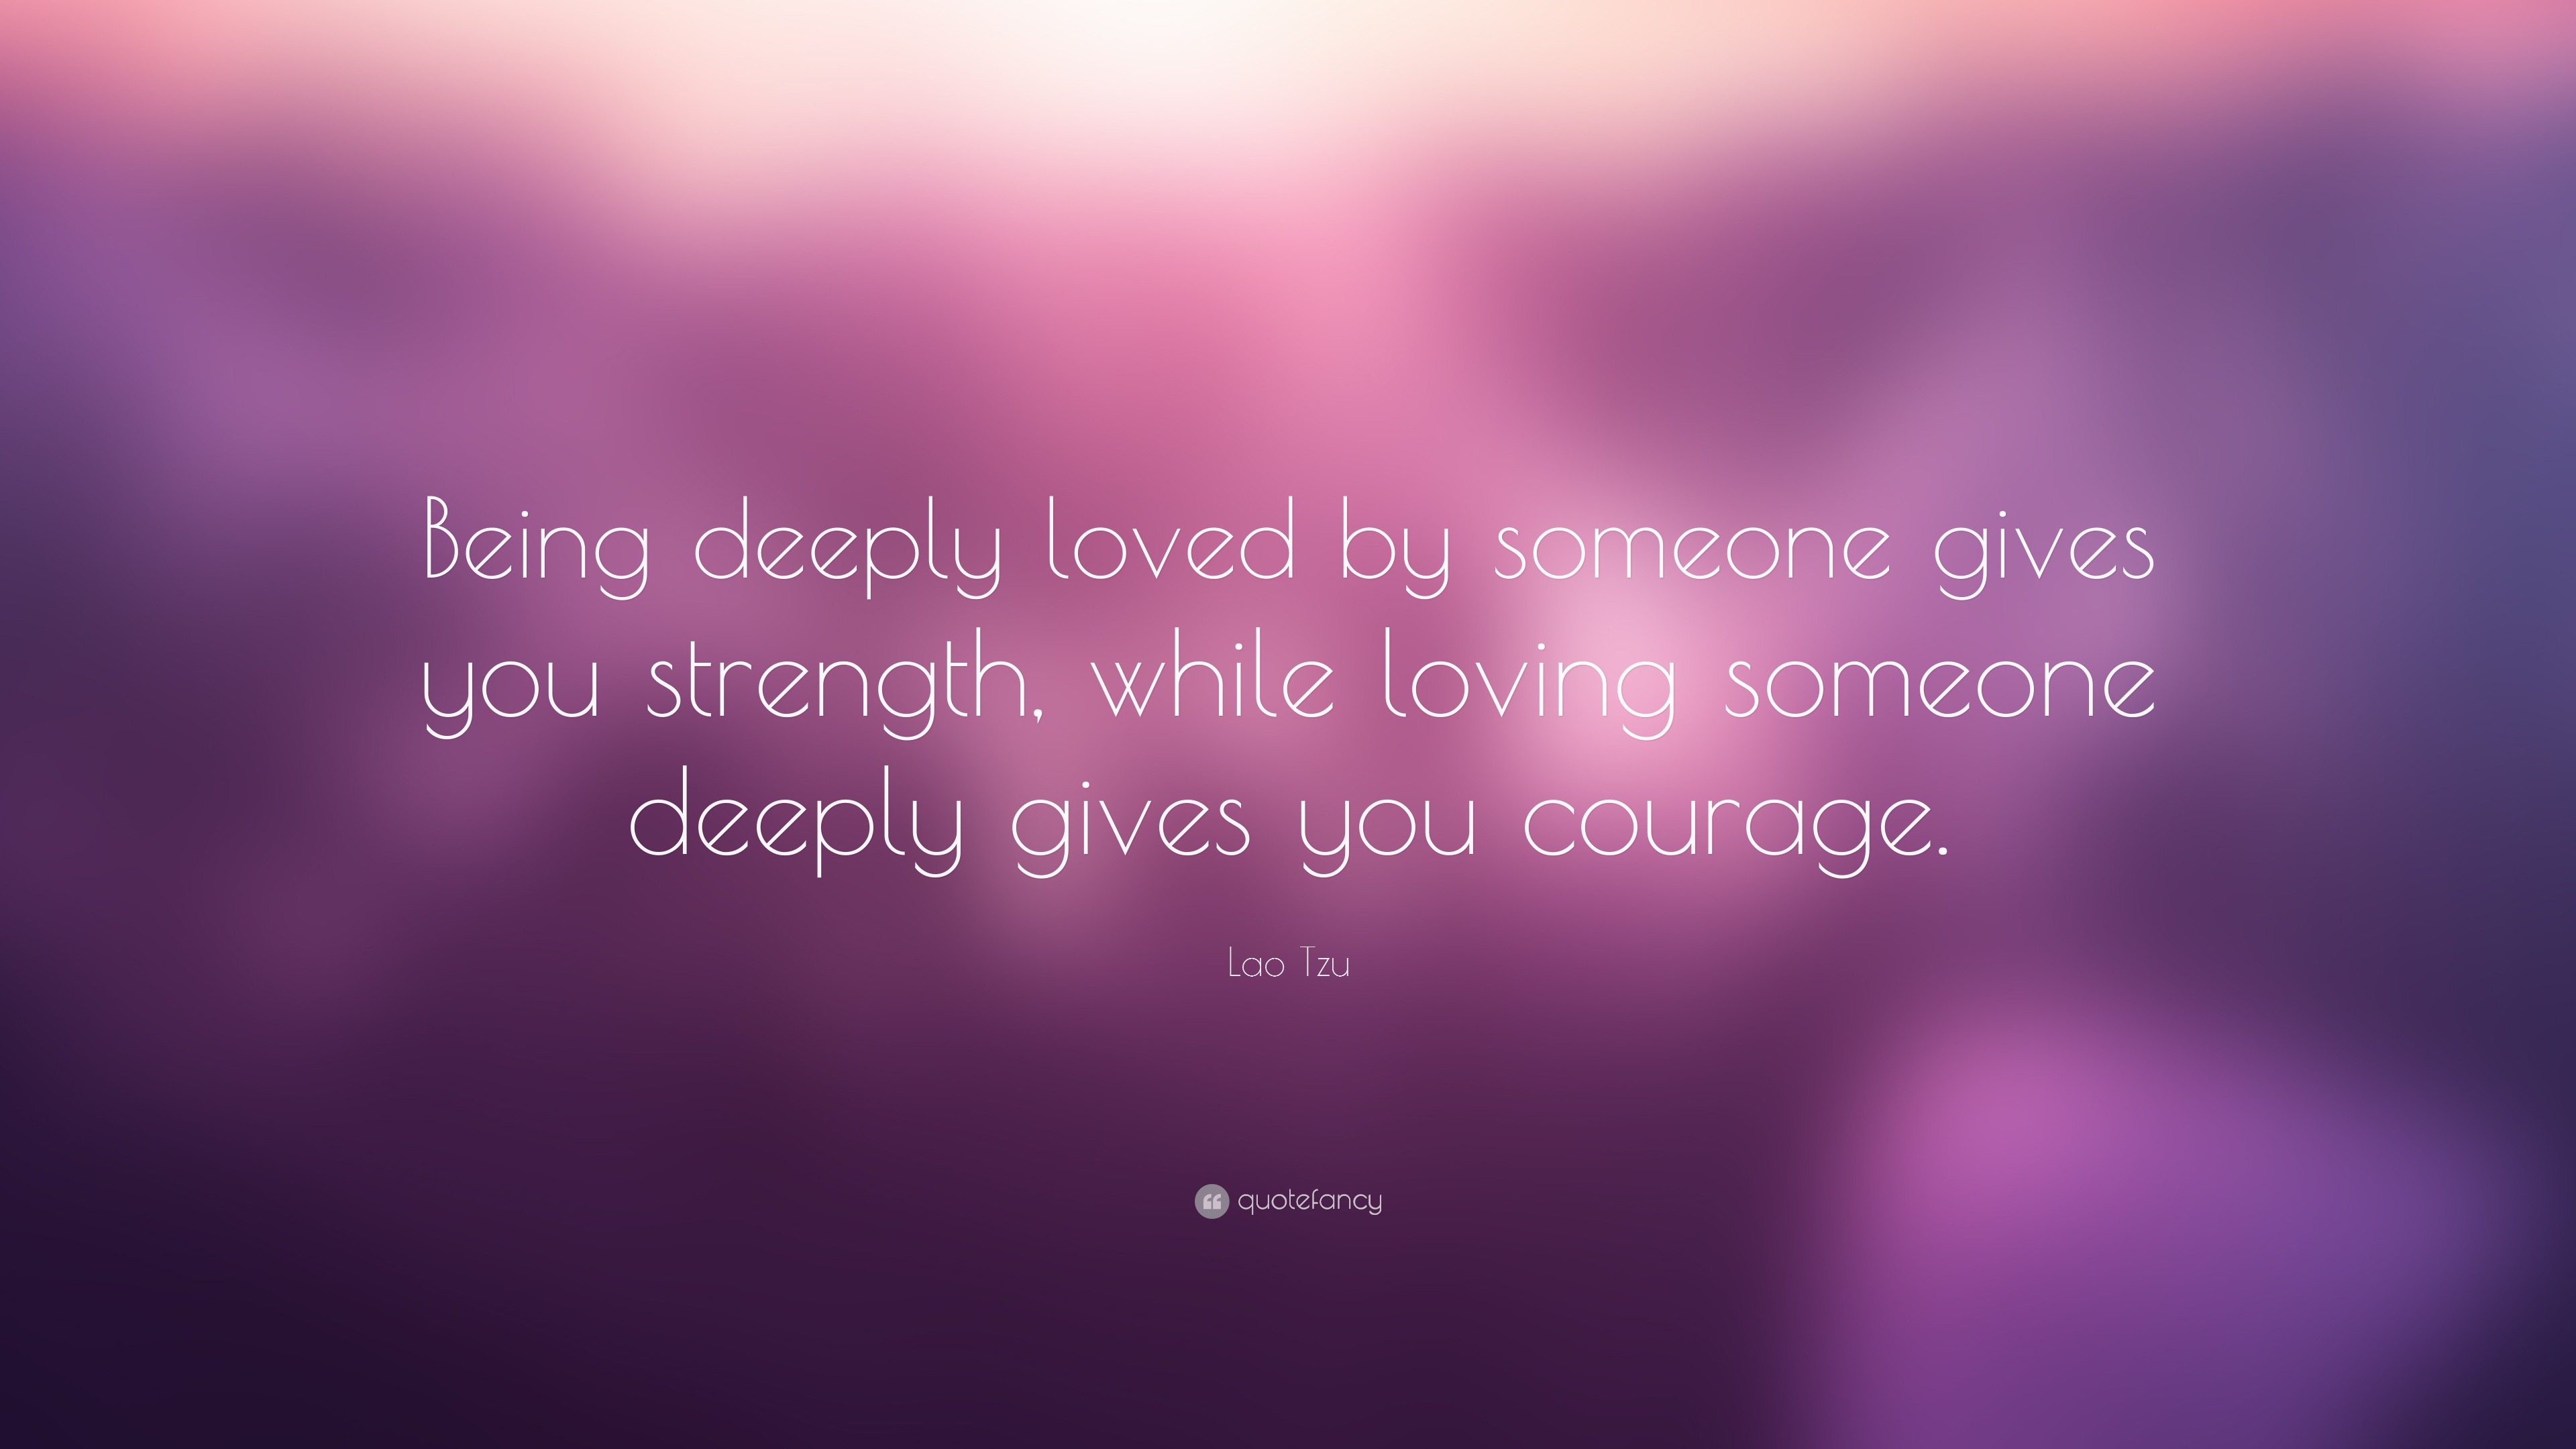 Lao Tzu Quote “being Deeply Loved By Someone Gives You Strength While Loving Someone Deeply